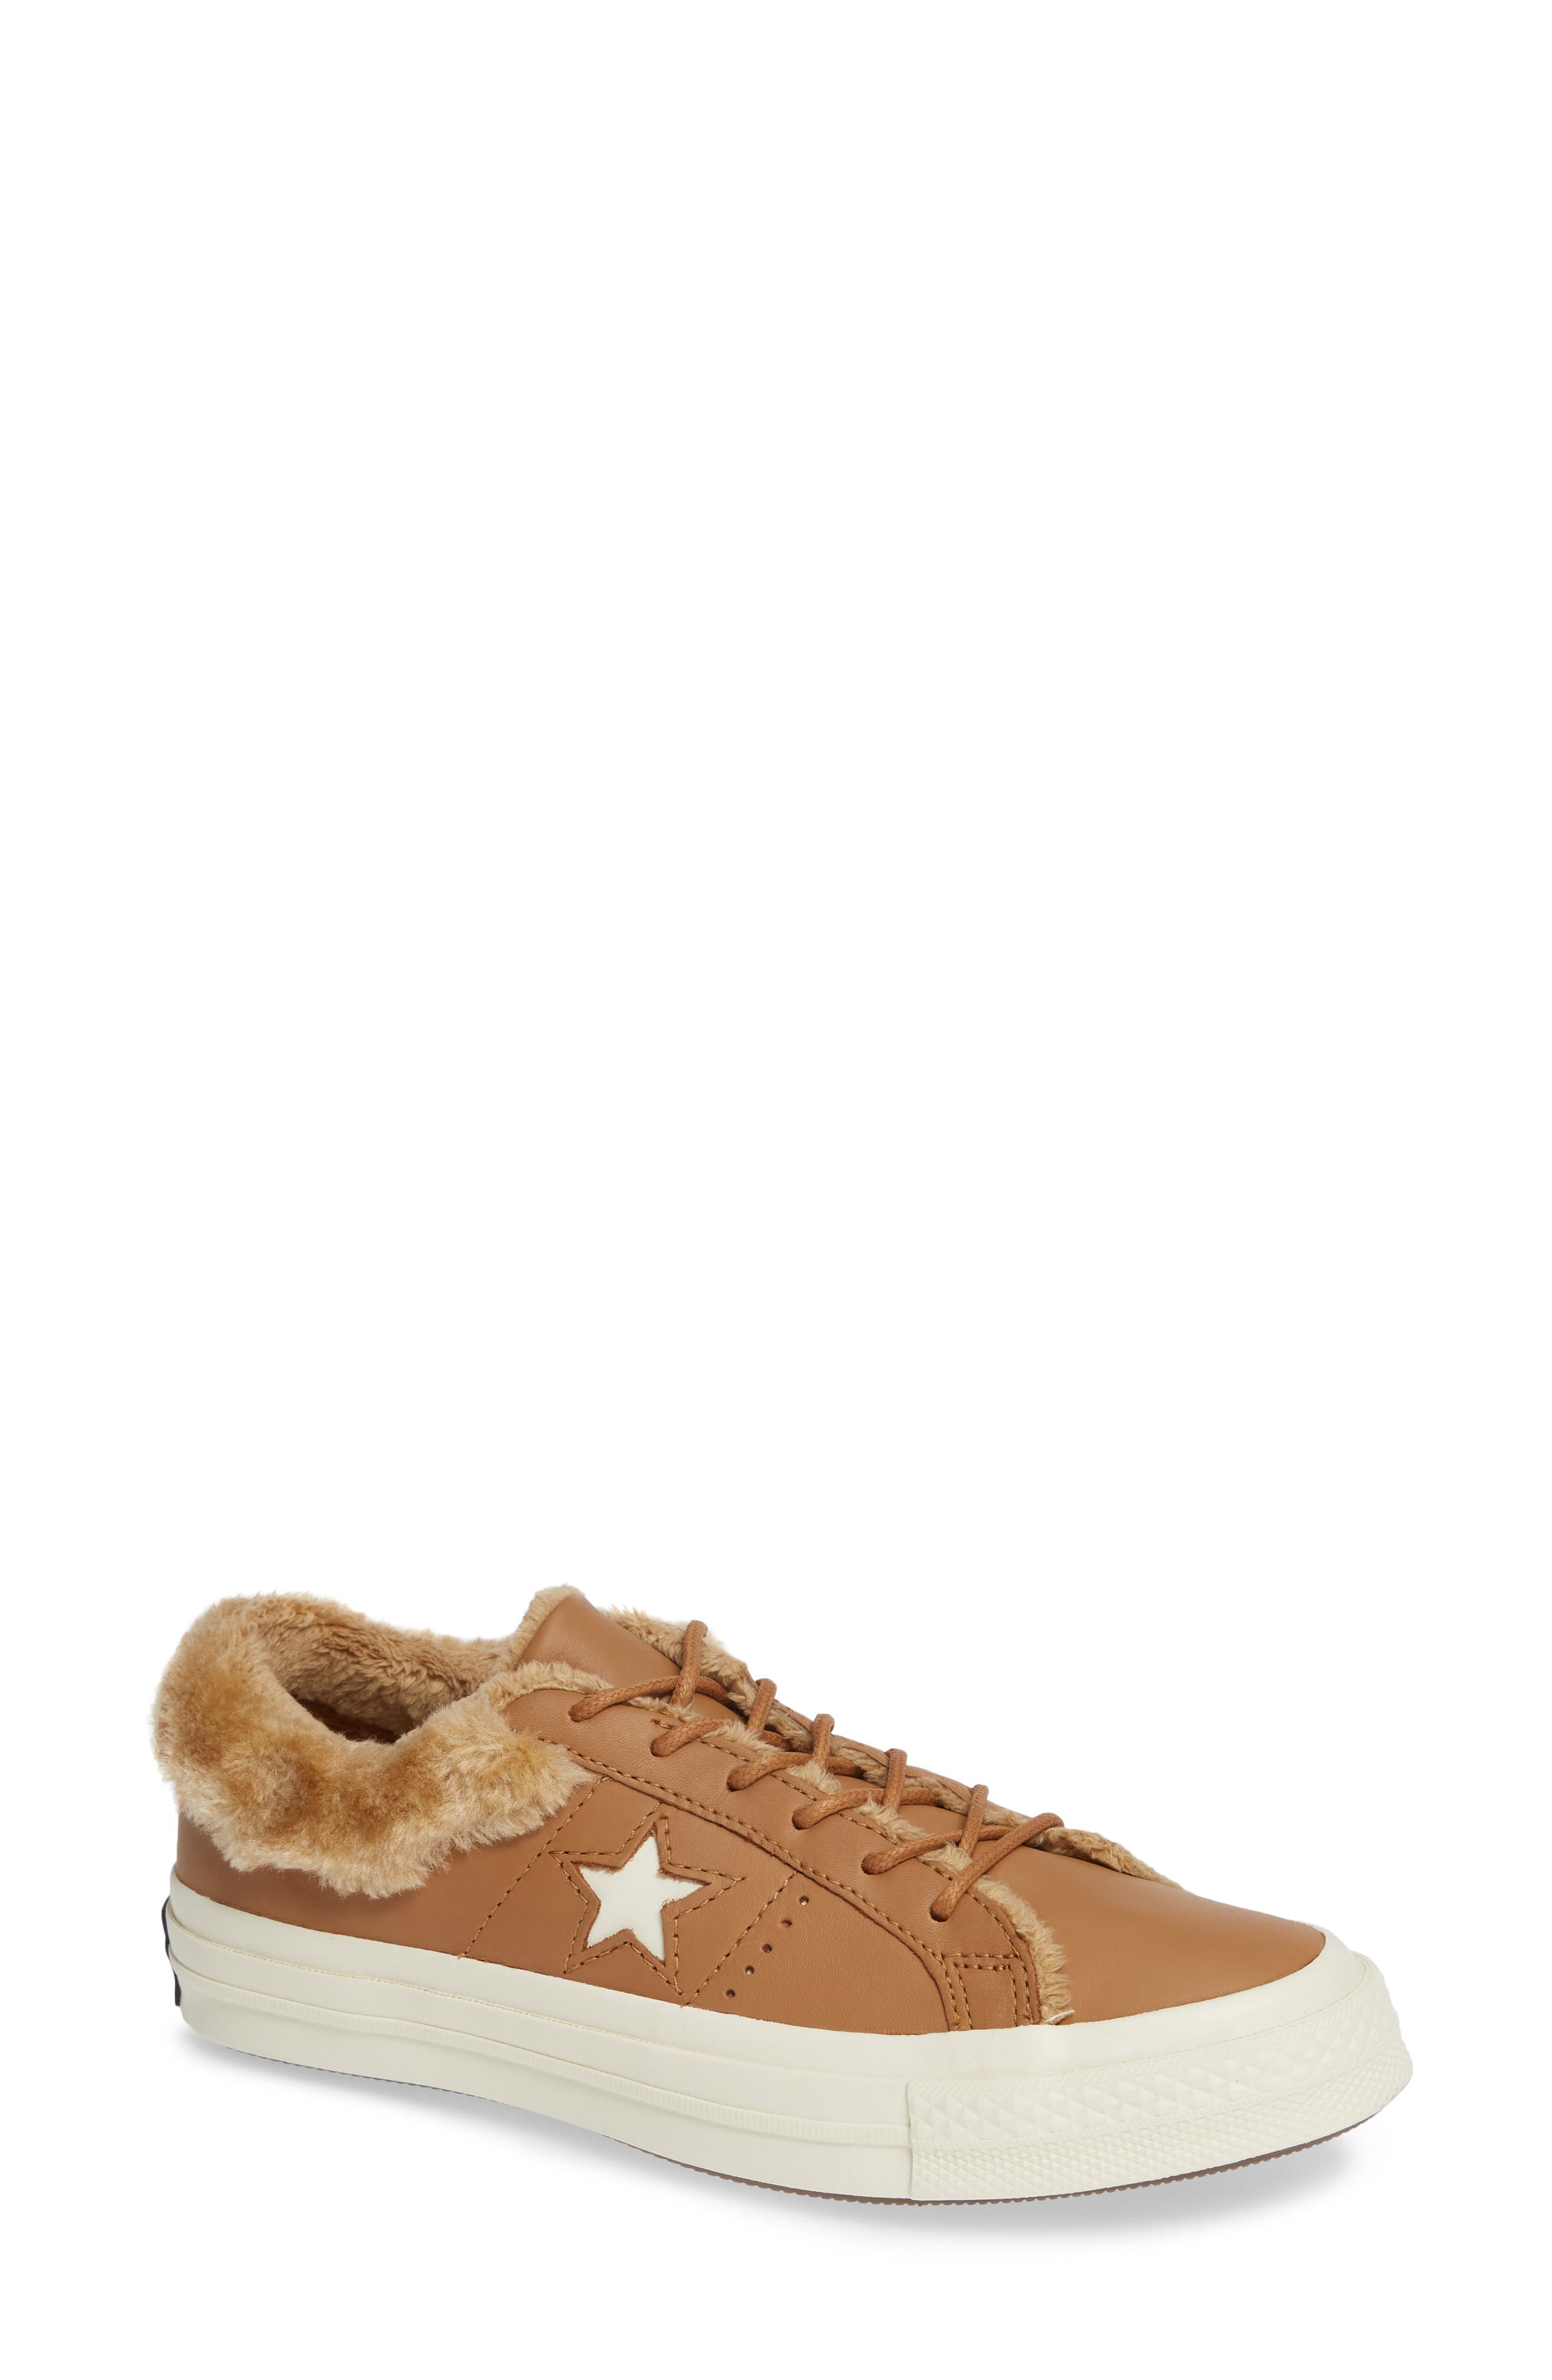 converse one star street warmer leather low top